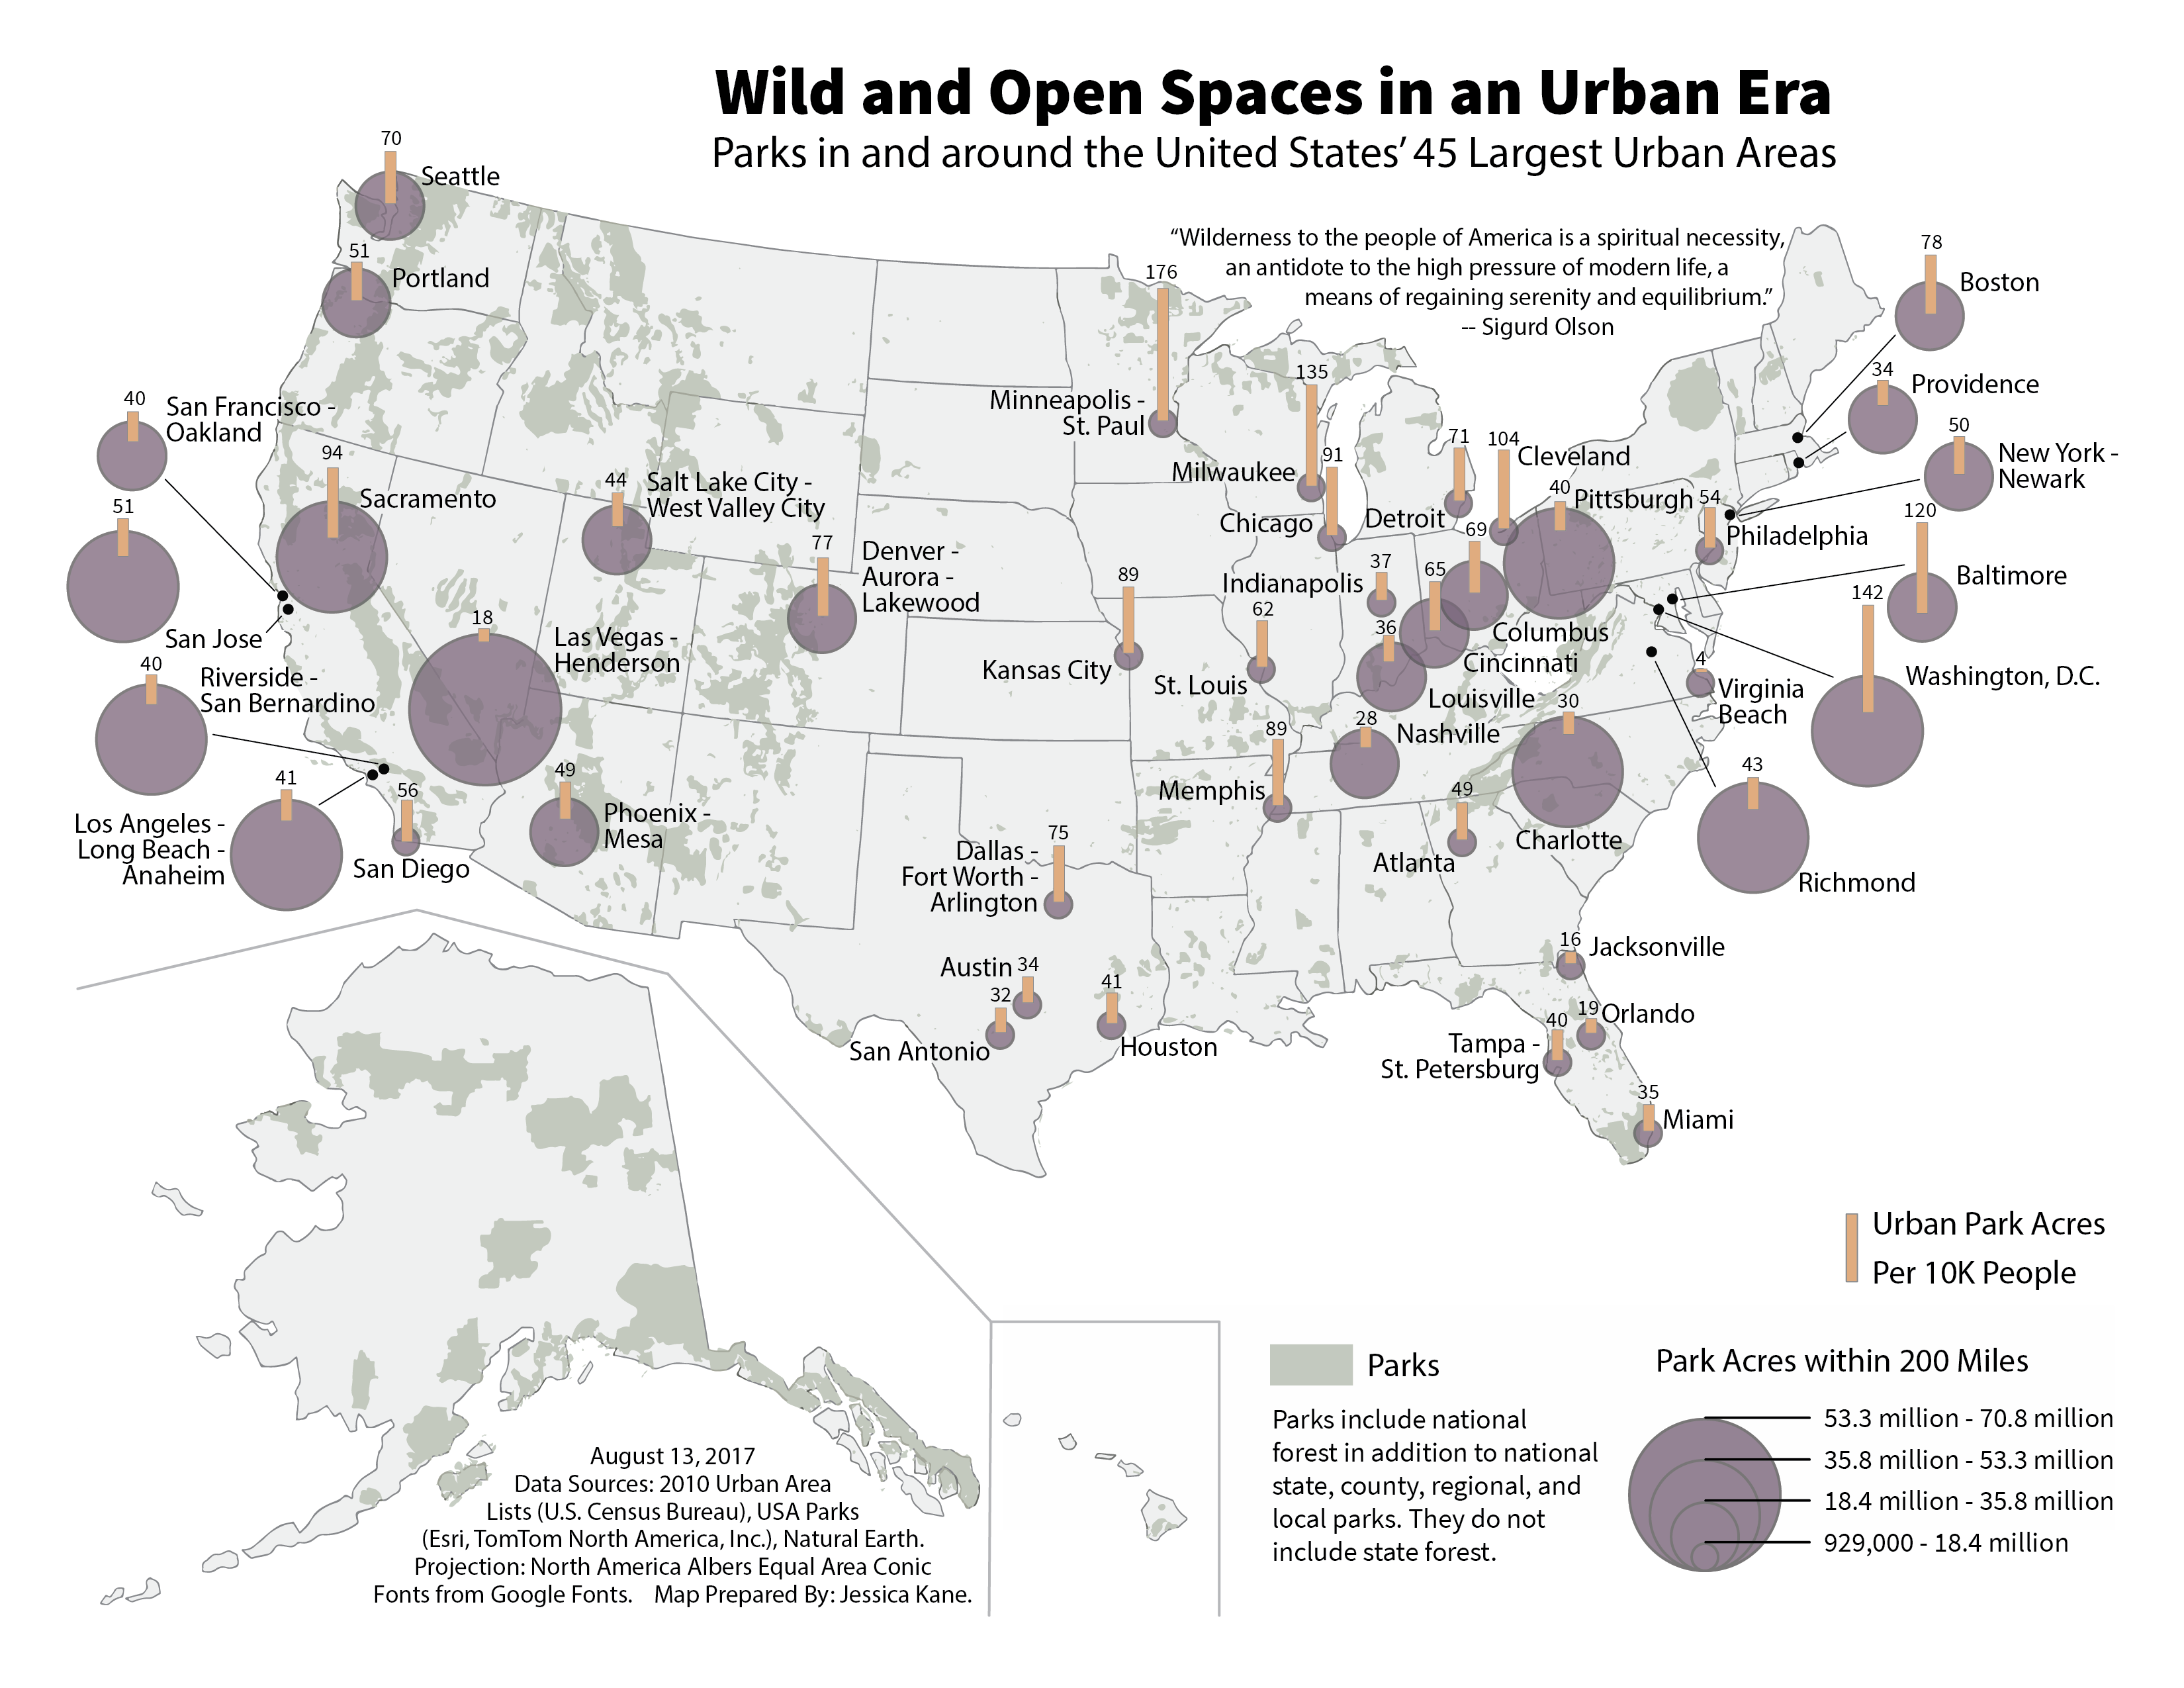 Wild and Open Spaces in an Urban Era Map